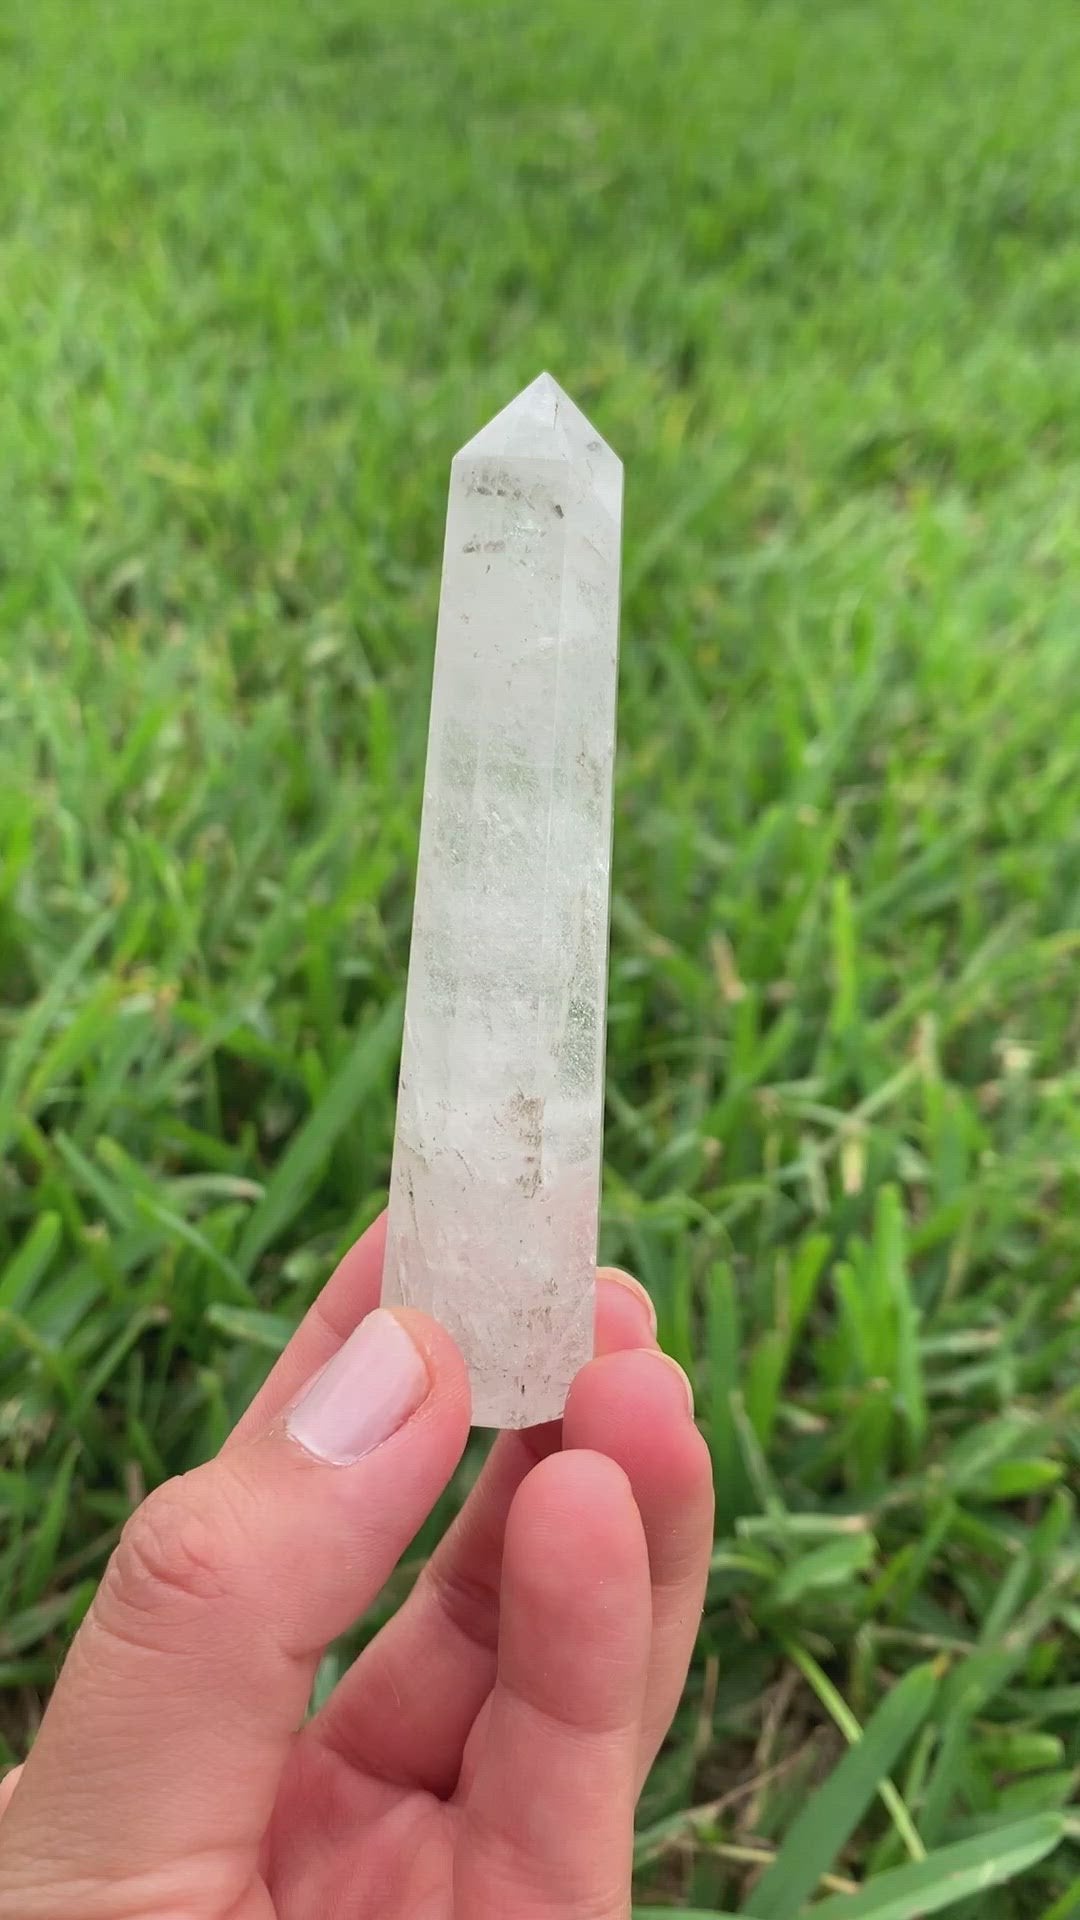 Clear Quartz Polished Stone Obelisk | Magic Crystals. These Vesuvianite obelisks hold a power all their own as they symbolize the ancient obelisks found in Egypt. Shop Clear Quartz obelisks, wands and pencil points. Crystal Clear quartz is the most recognized type of crystal. In fact, many people envision quartz crystals when they think of crystals, even though there are many different types of crystals.